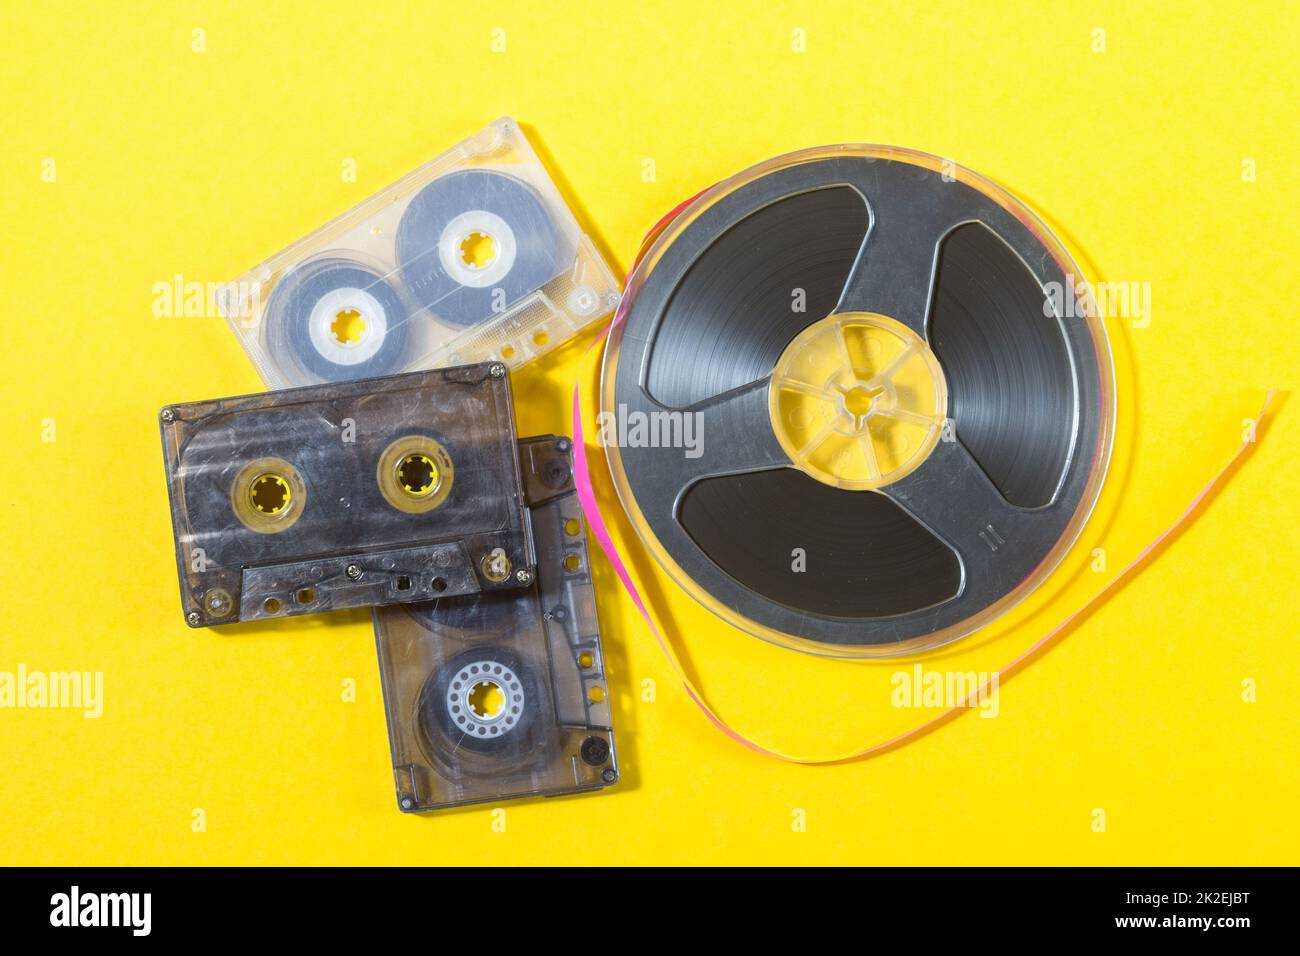 Old-fashioned technology: a pile of reel-to-reel audio tapes Stock Photo -  Alamy